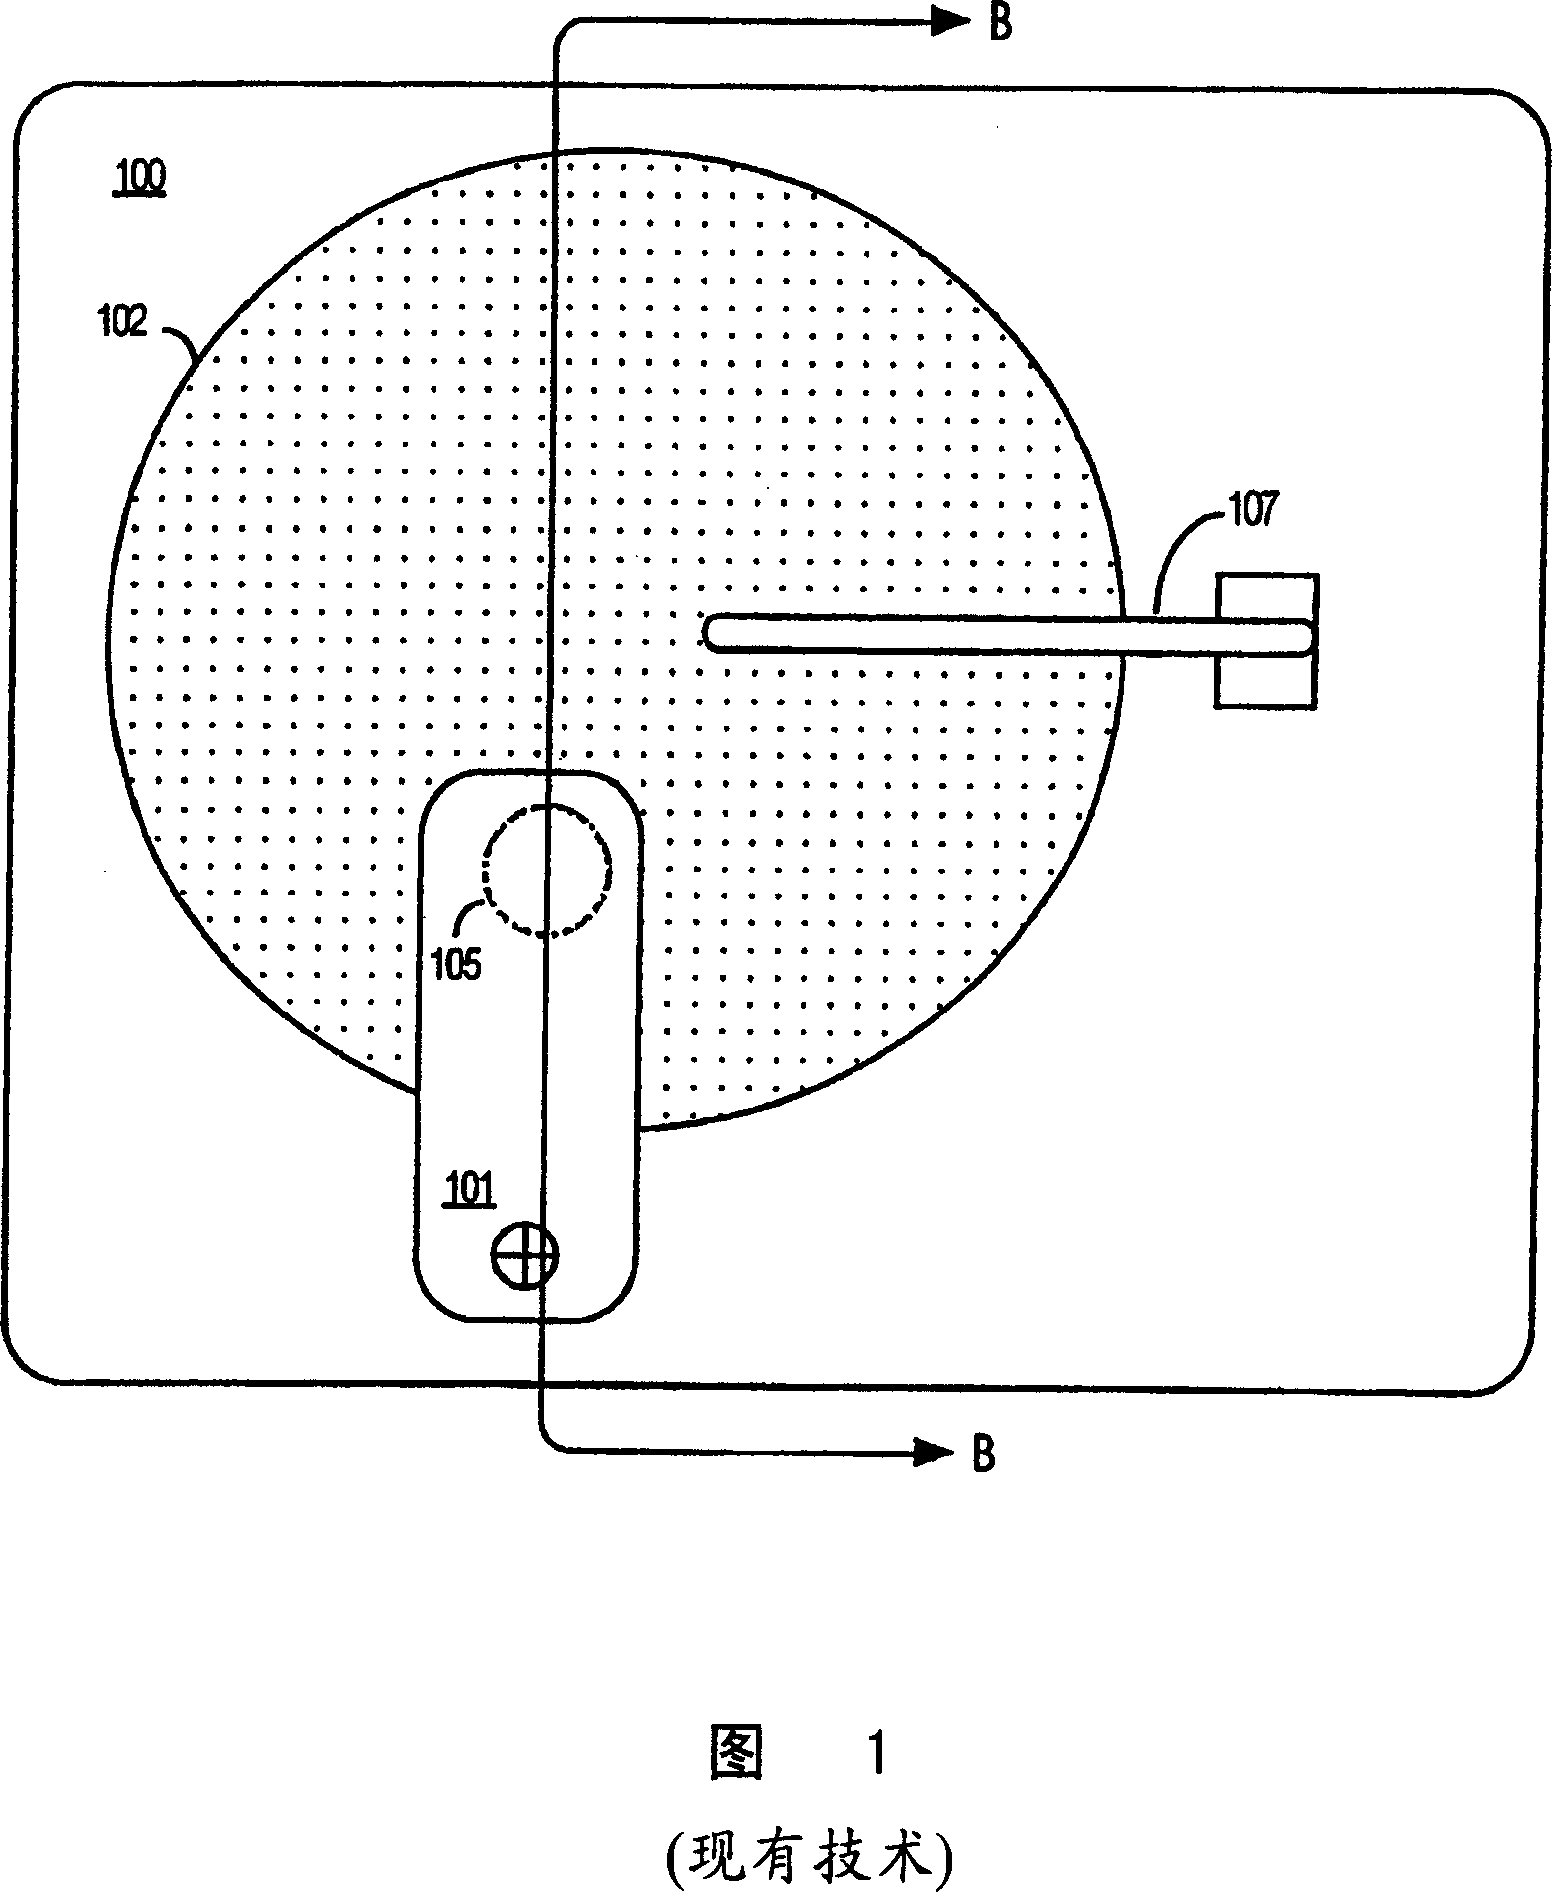 Method and system for polishing semiconductor wafers